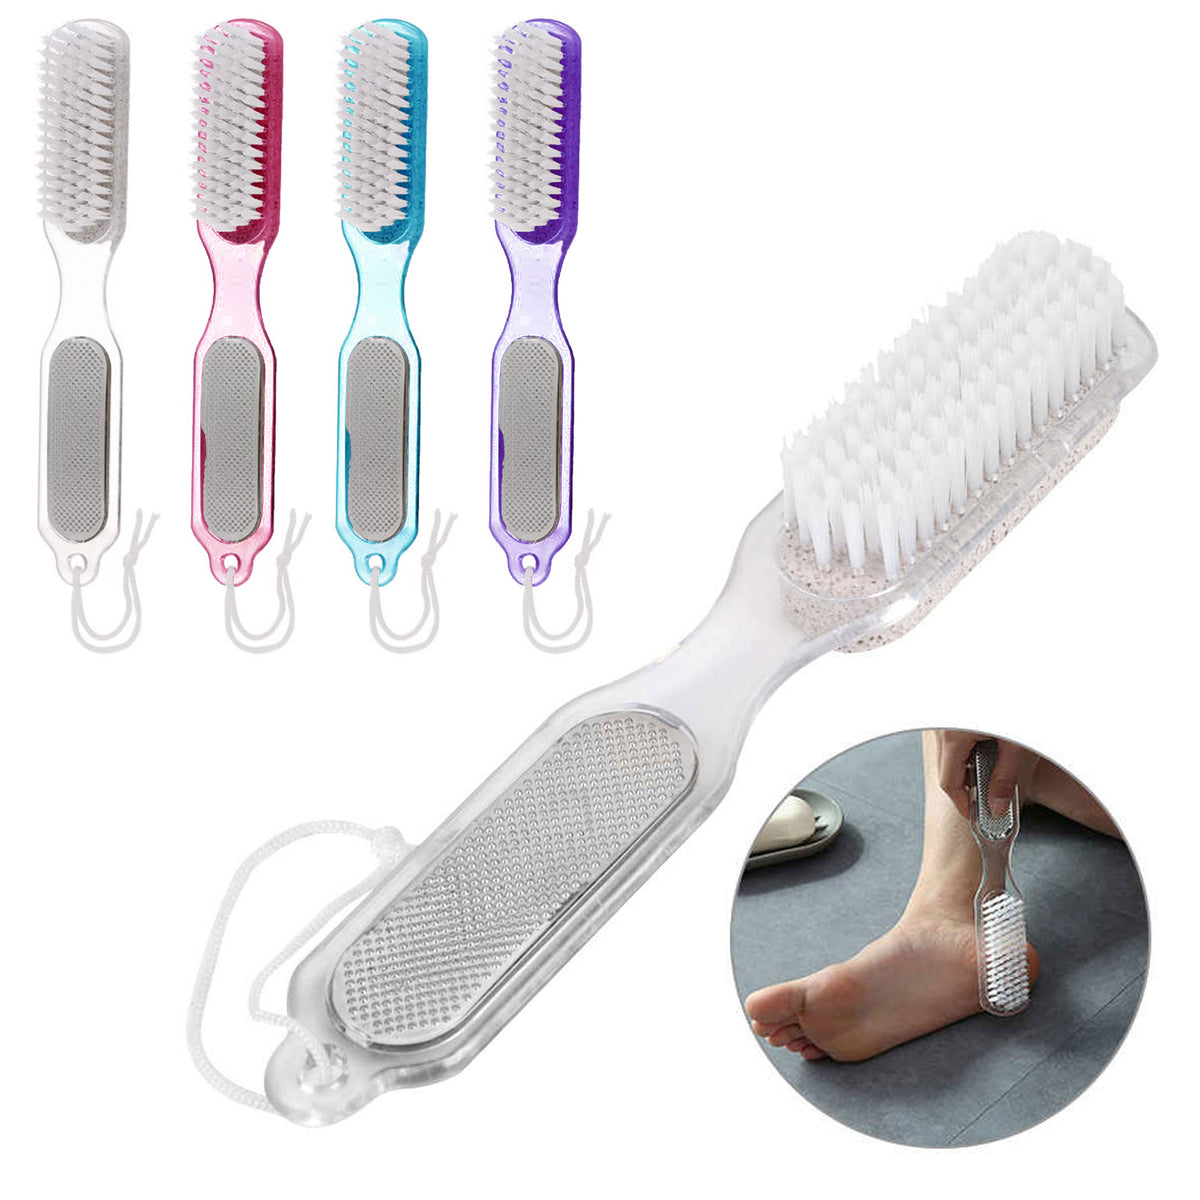 Ozzptuu 2-in-1 Foot Brushes & Pumice Exfoliator Dead Skin Callus Remover  Deeply Cleanse Your Feet (Green)